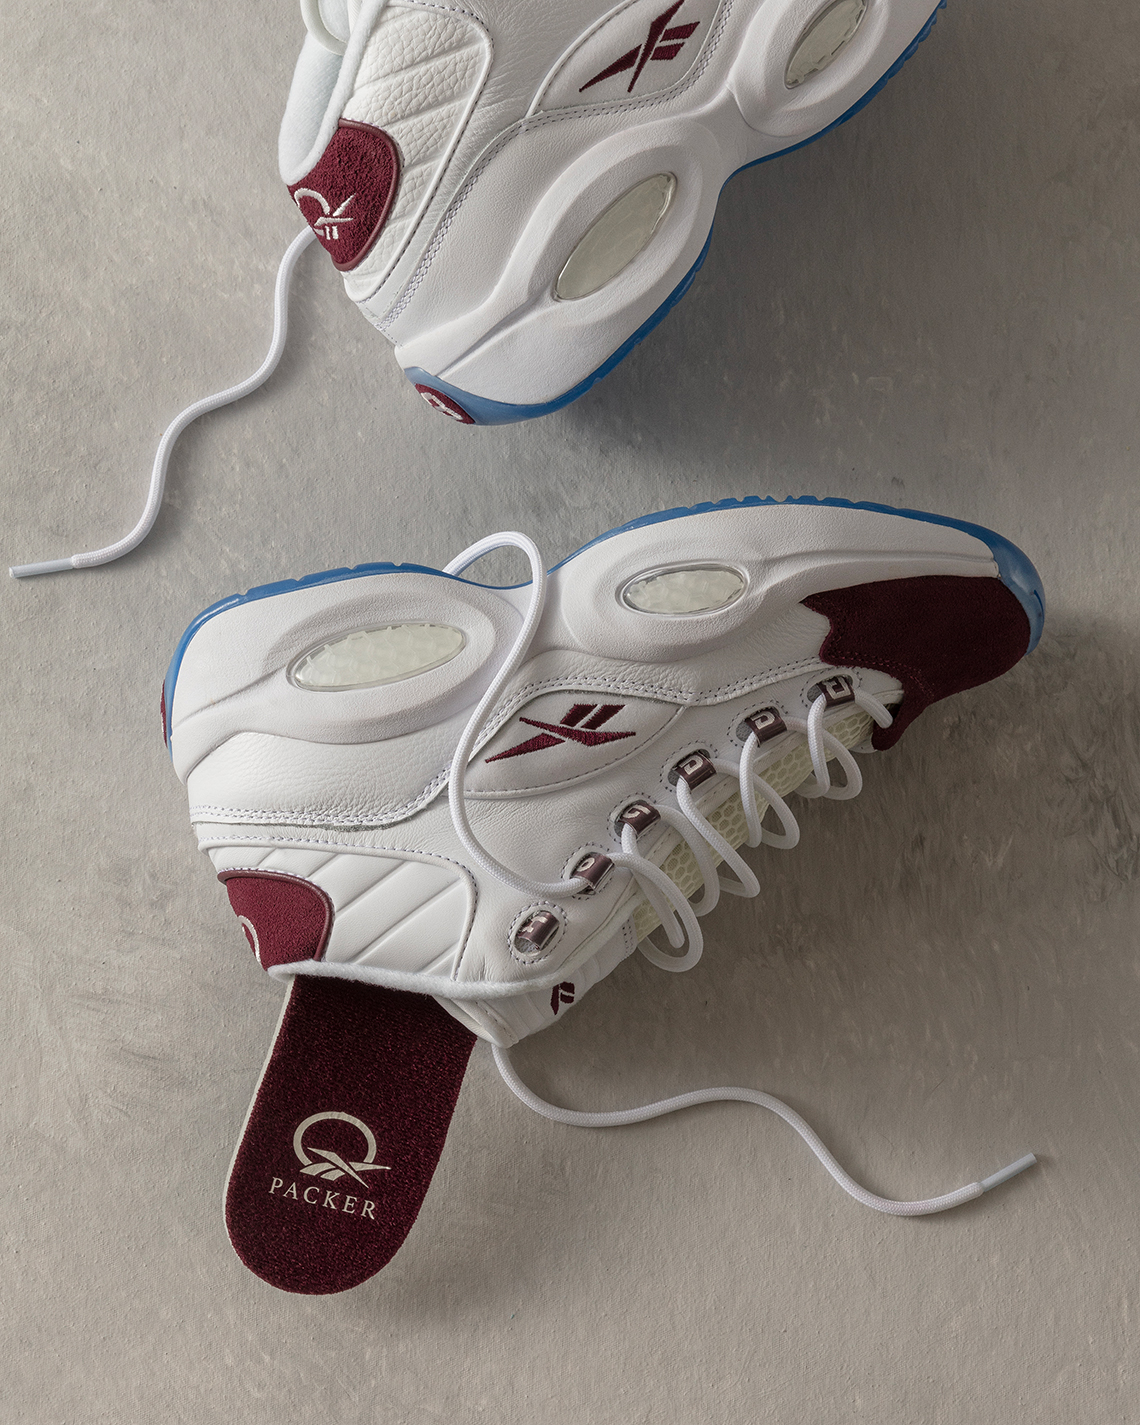 Packer brand new with original box Reebok Royal Glide Ripple Clip CM9099 Burgundy Suede Release Date 7